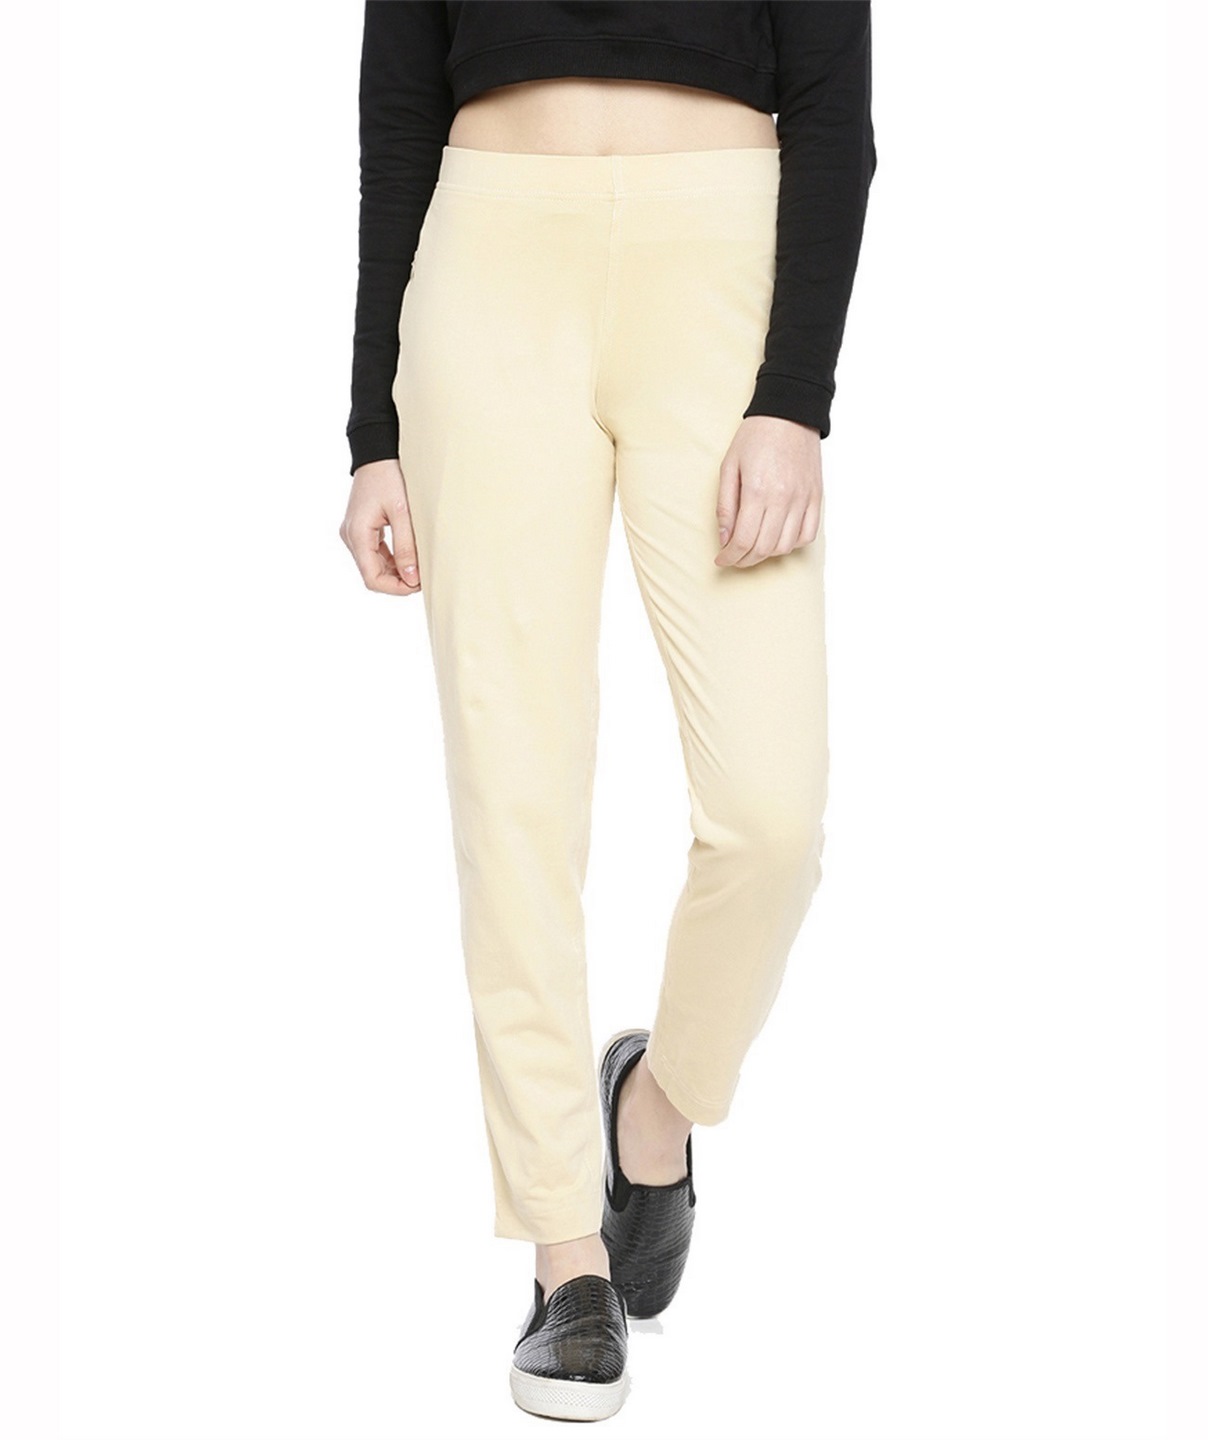 Women's Trousers | Black Trousers and Jeans For Women | Hobbs London |